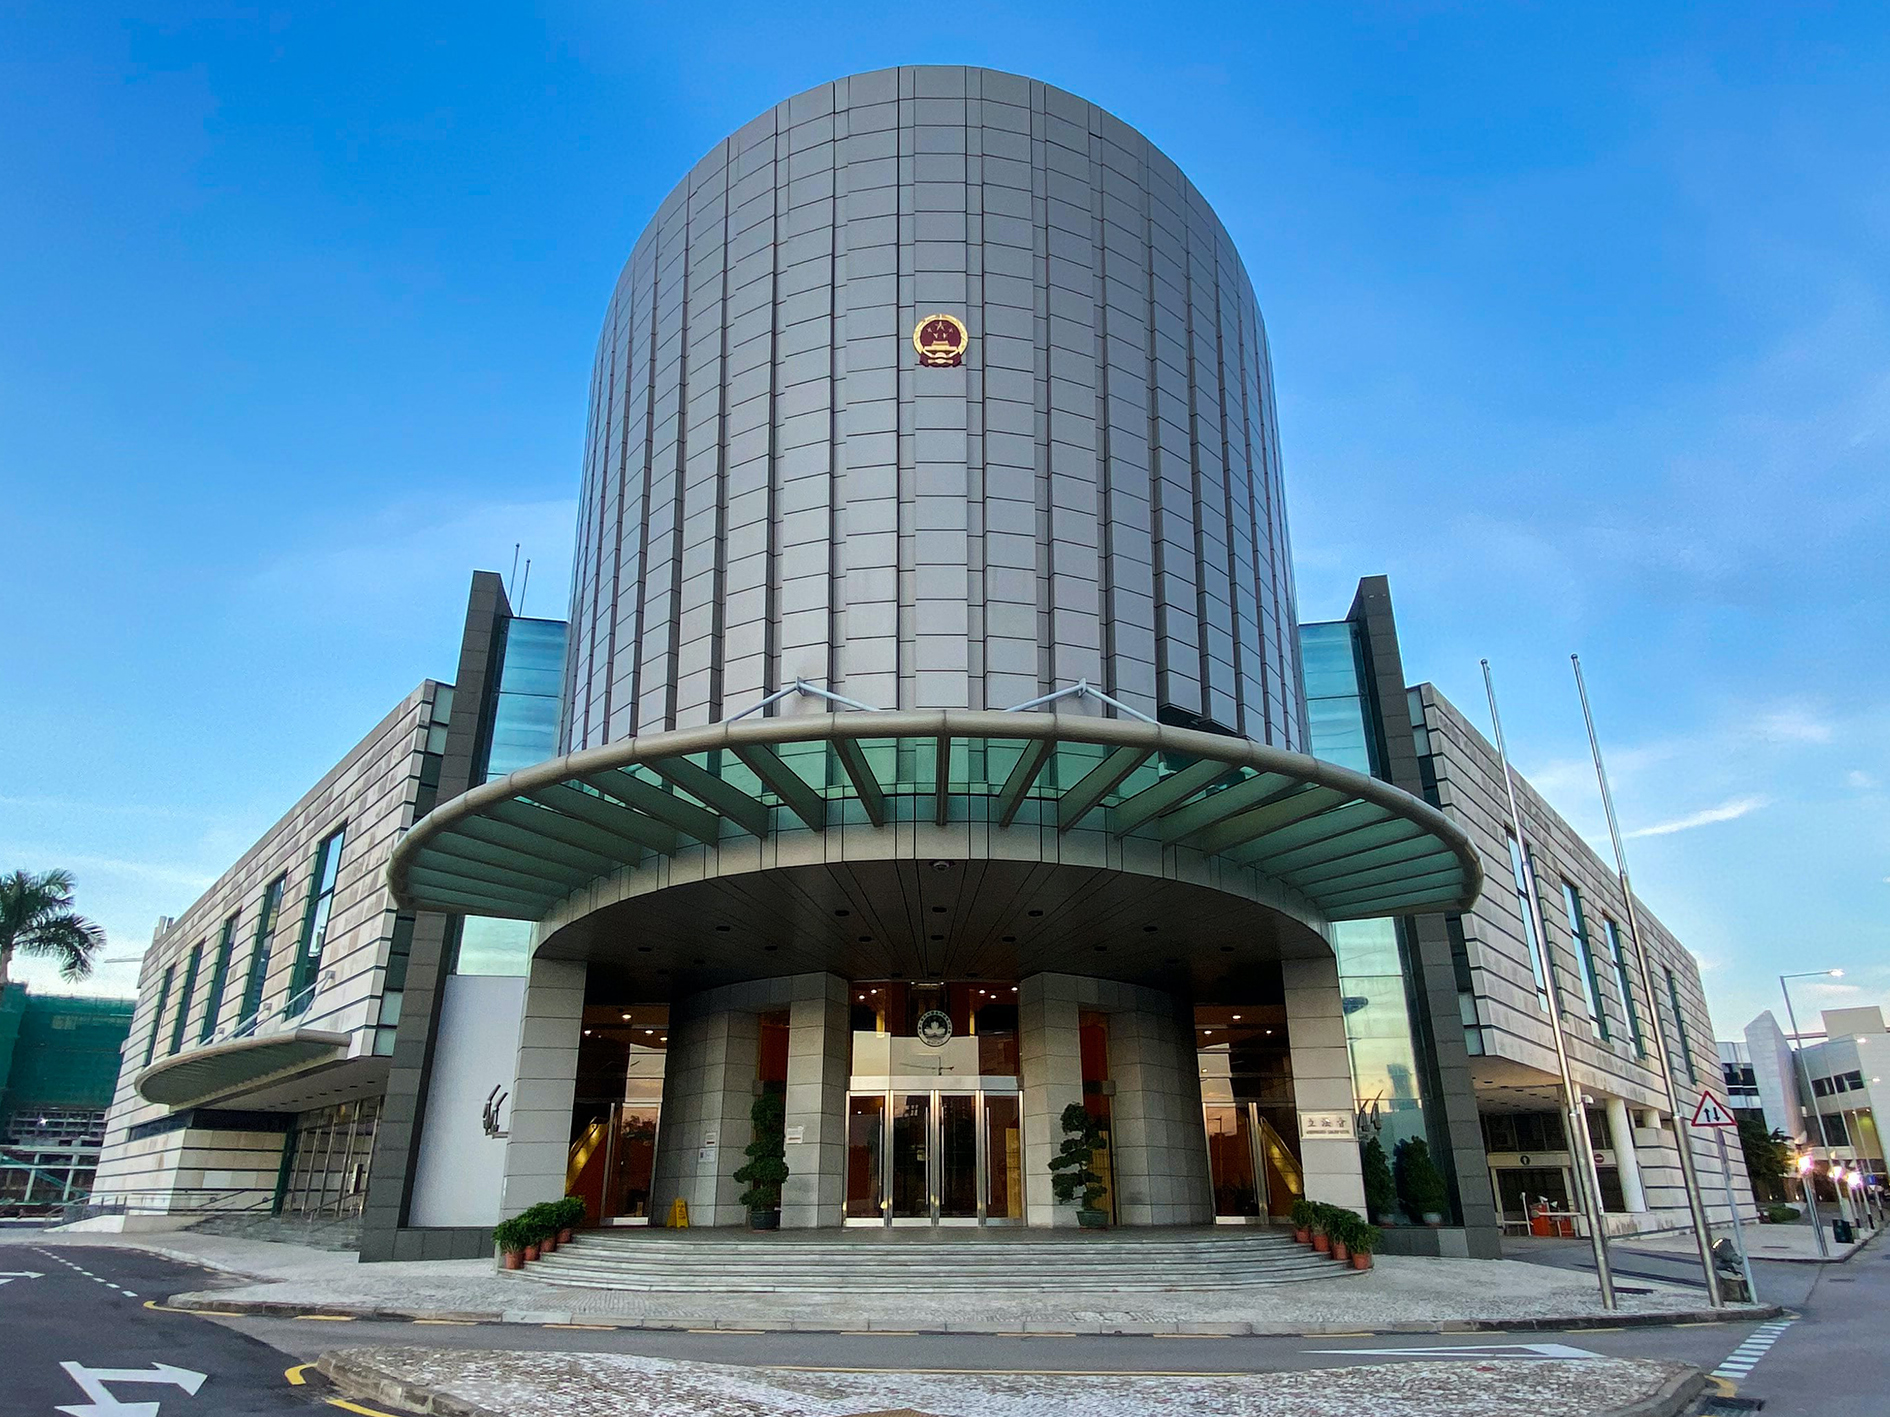 Macao government law on oaths of office